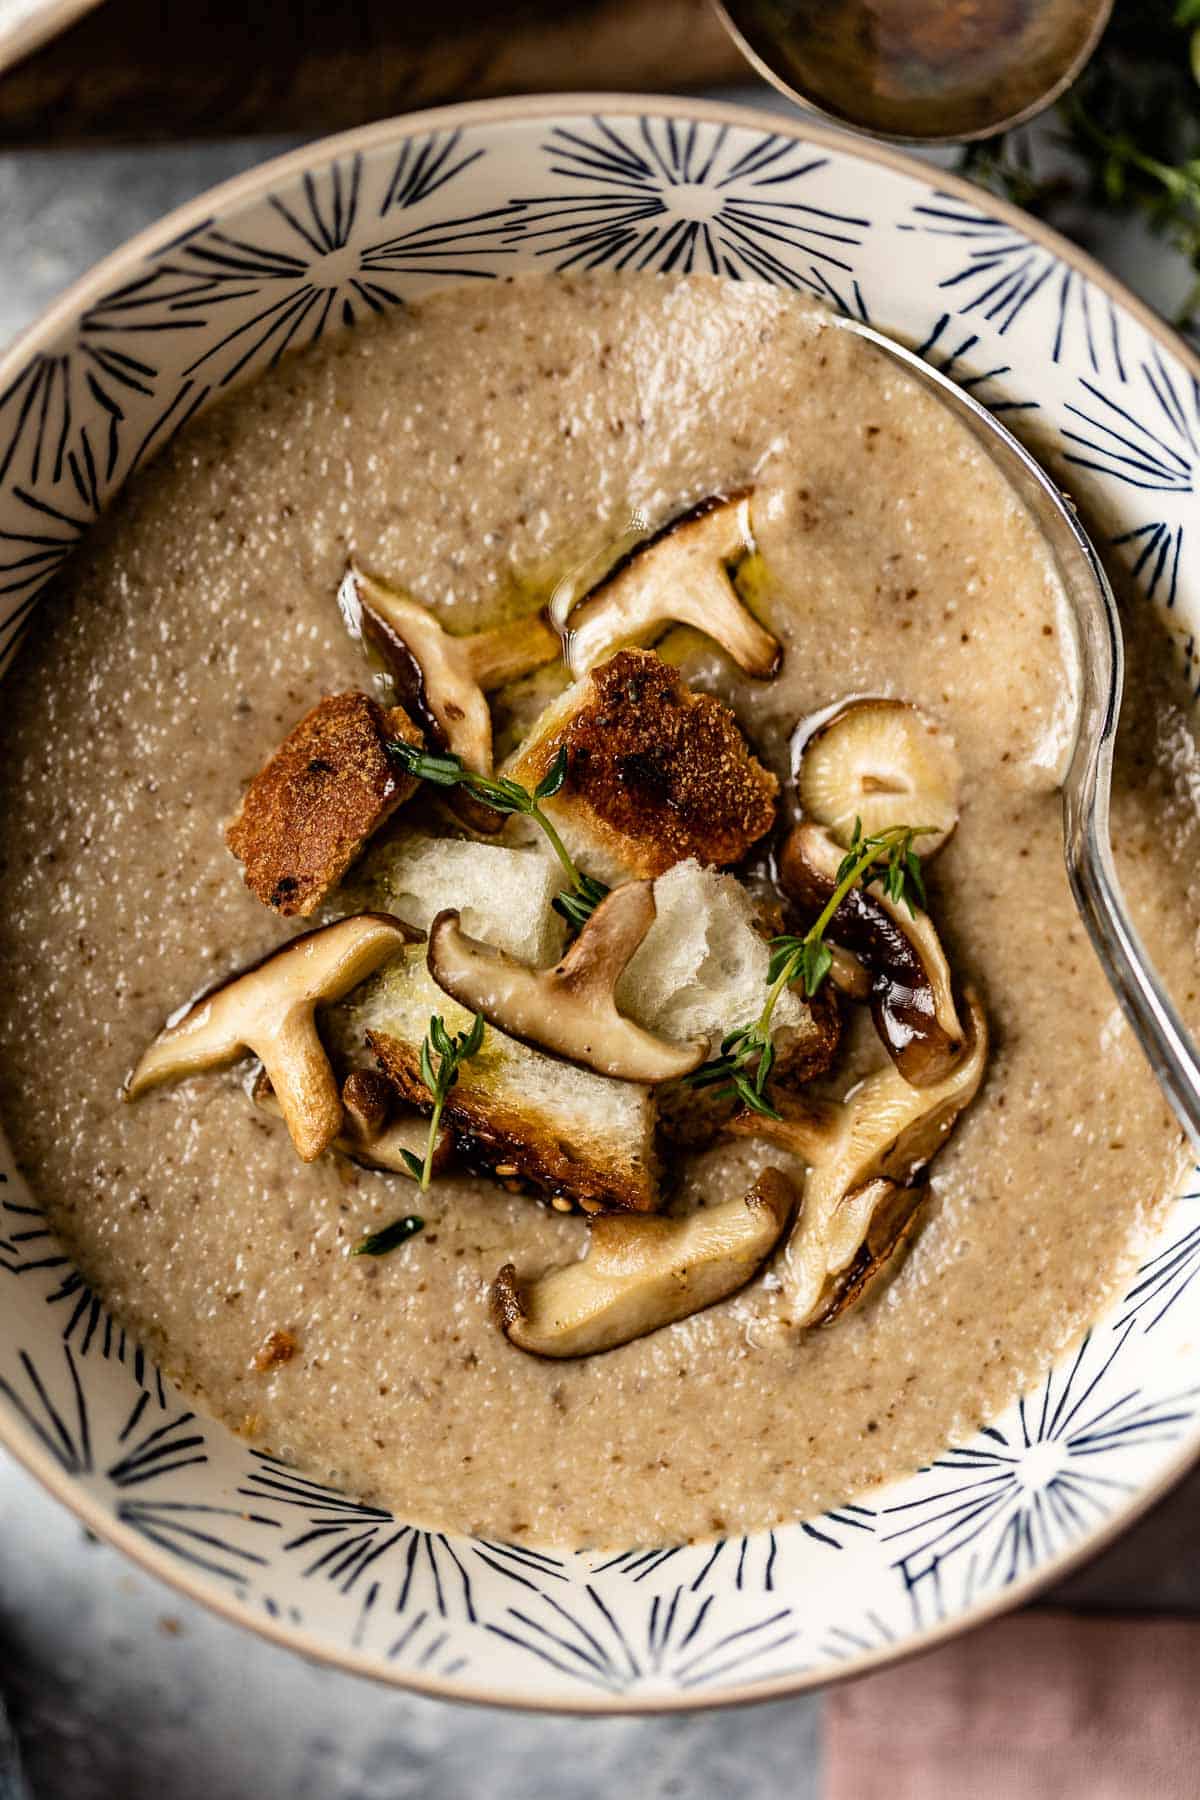 A creamy soup made with mushrooms in a bowl from the top view.